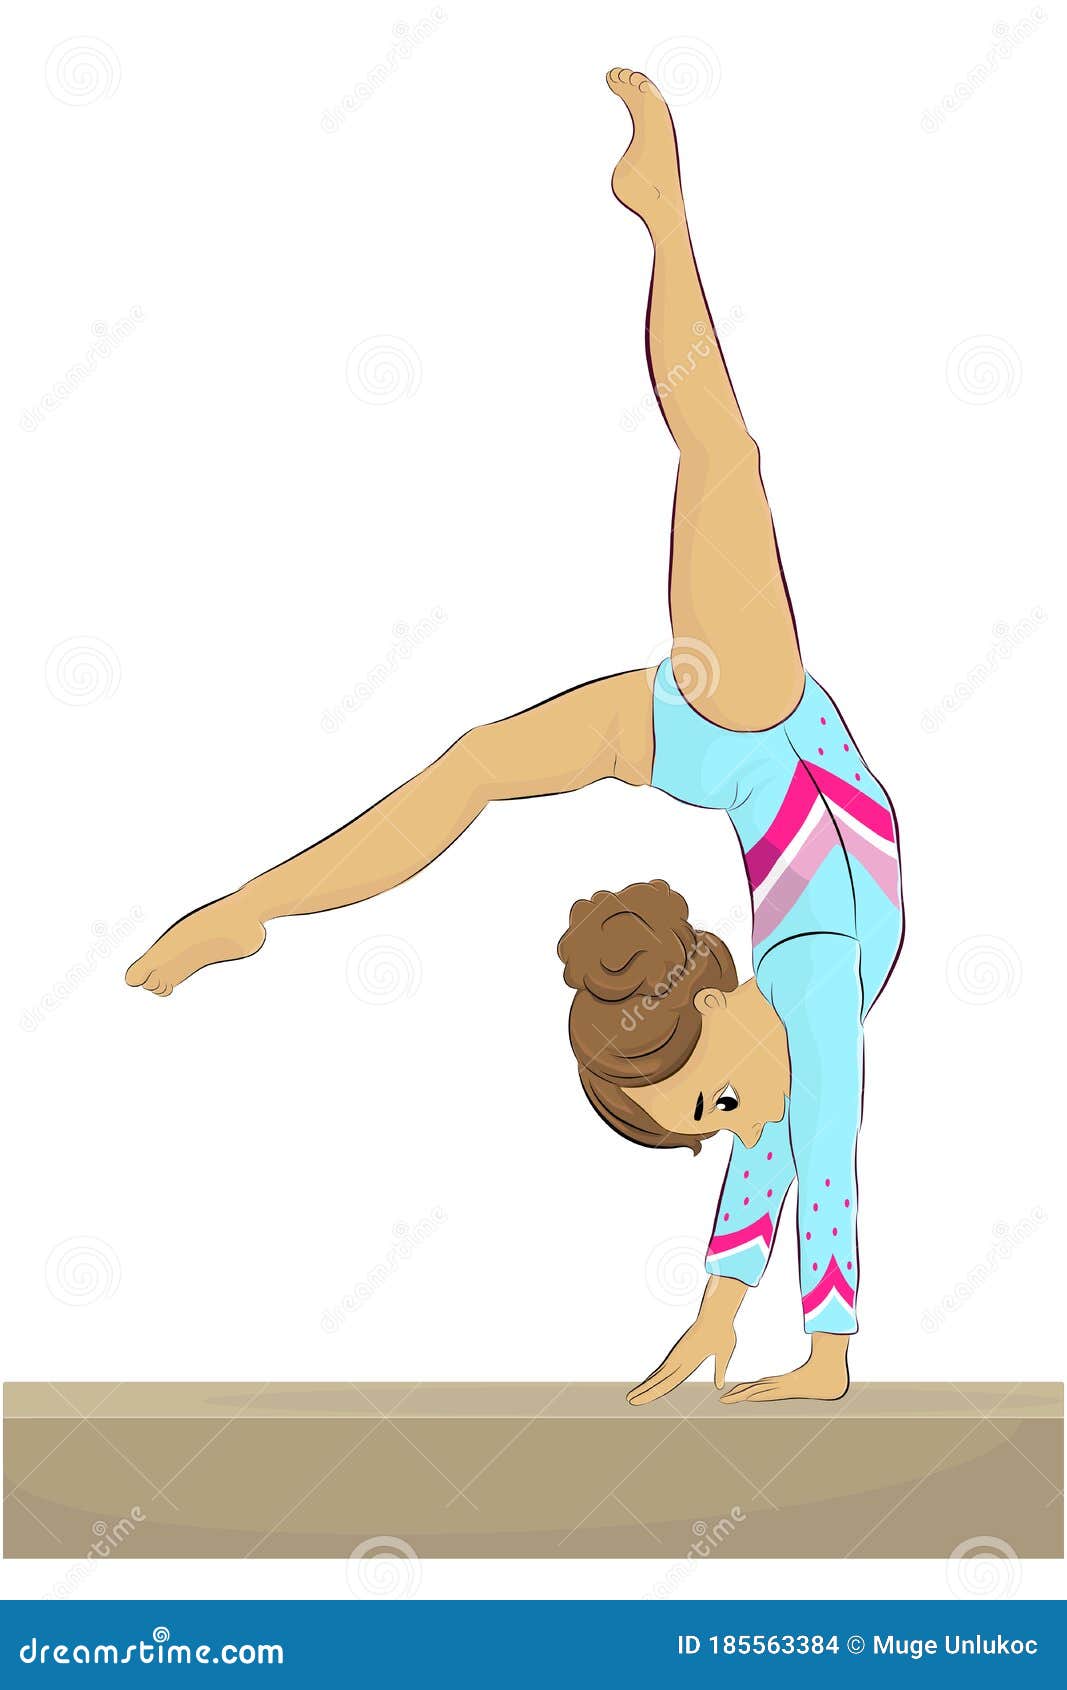 Vector Illustration of a Young Female Gymnast Performing on Balance Beam,  Back Walkover Stock Vector - Illustration of handstand, energy: 185563384